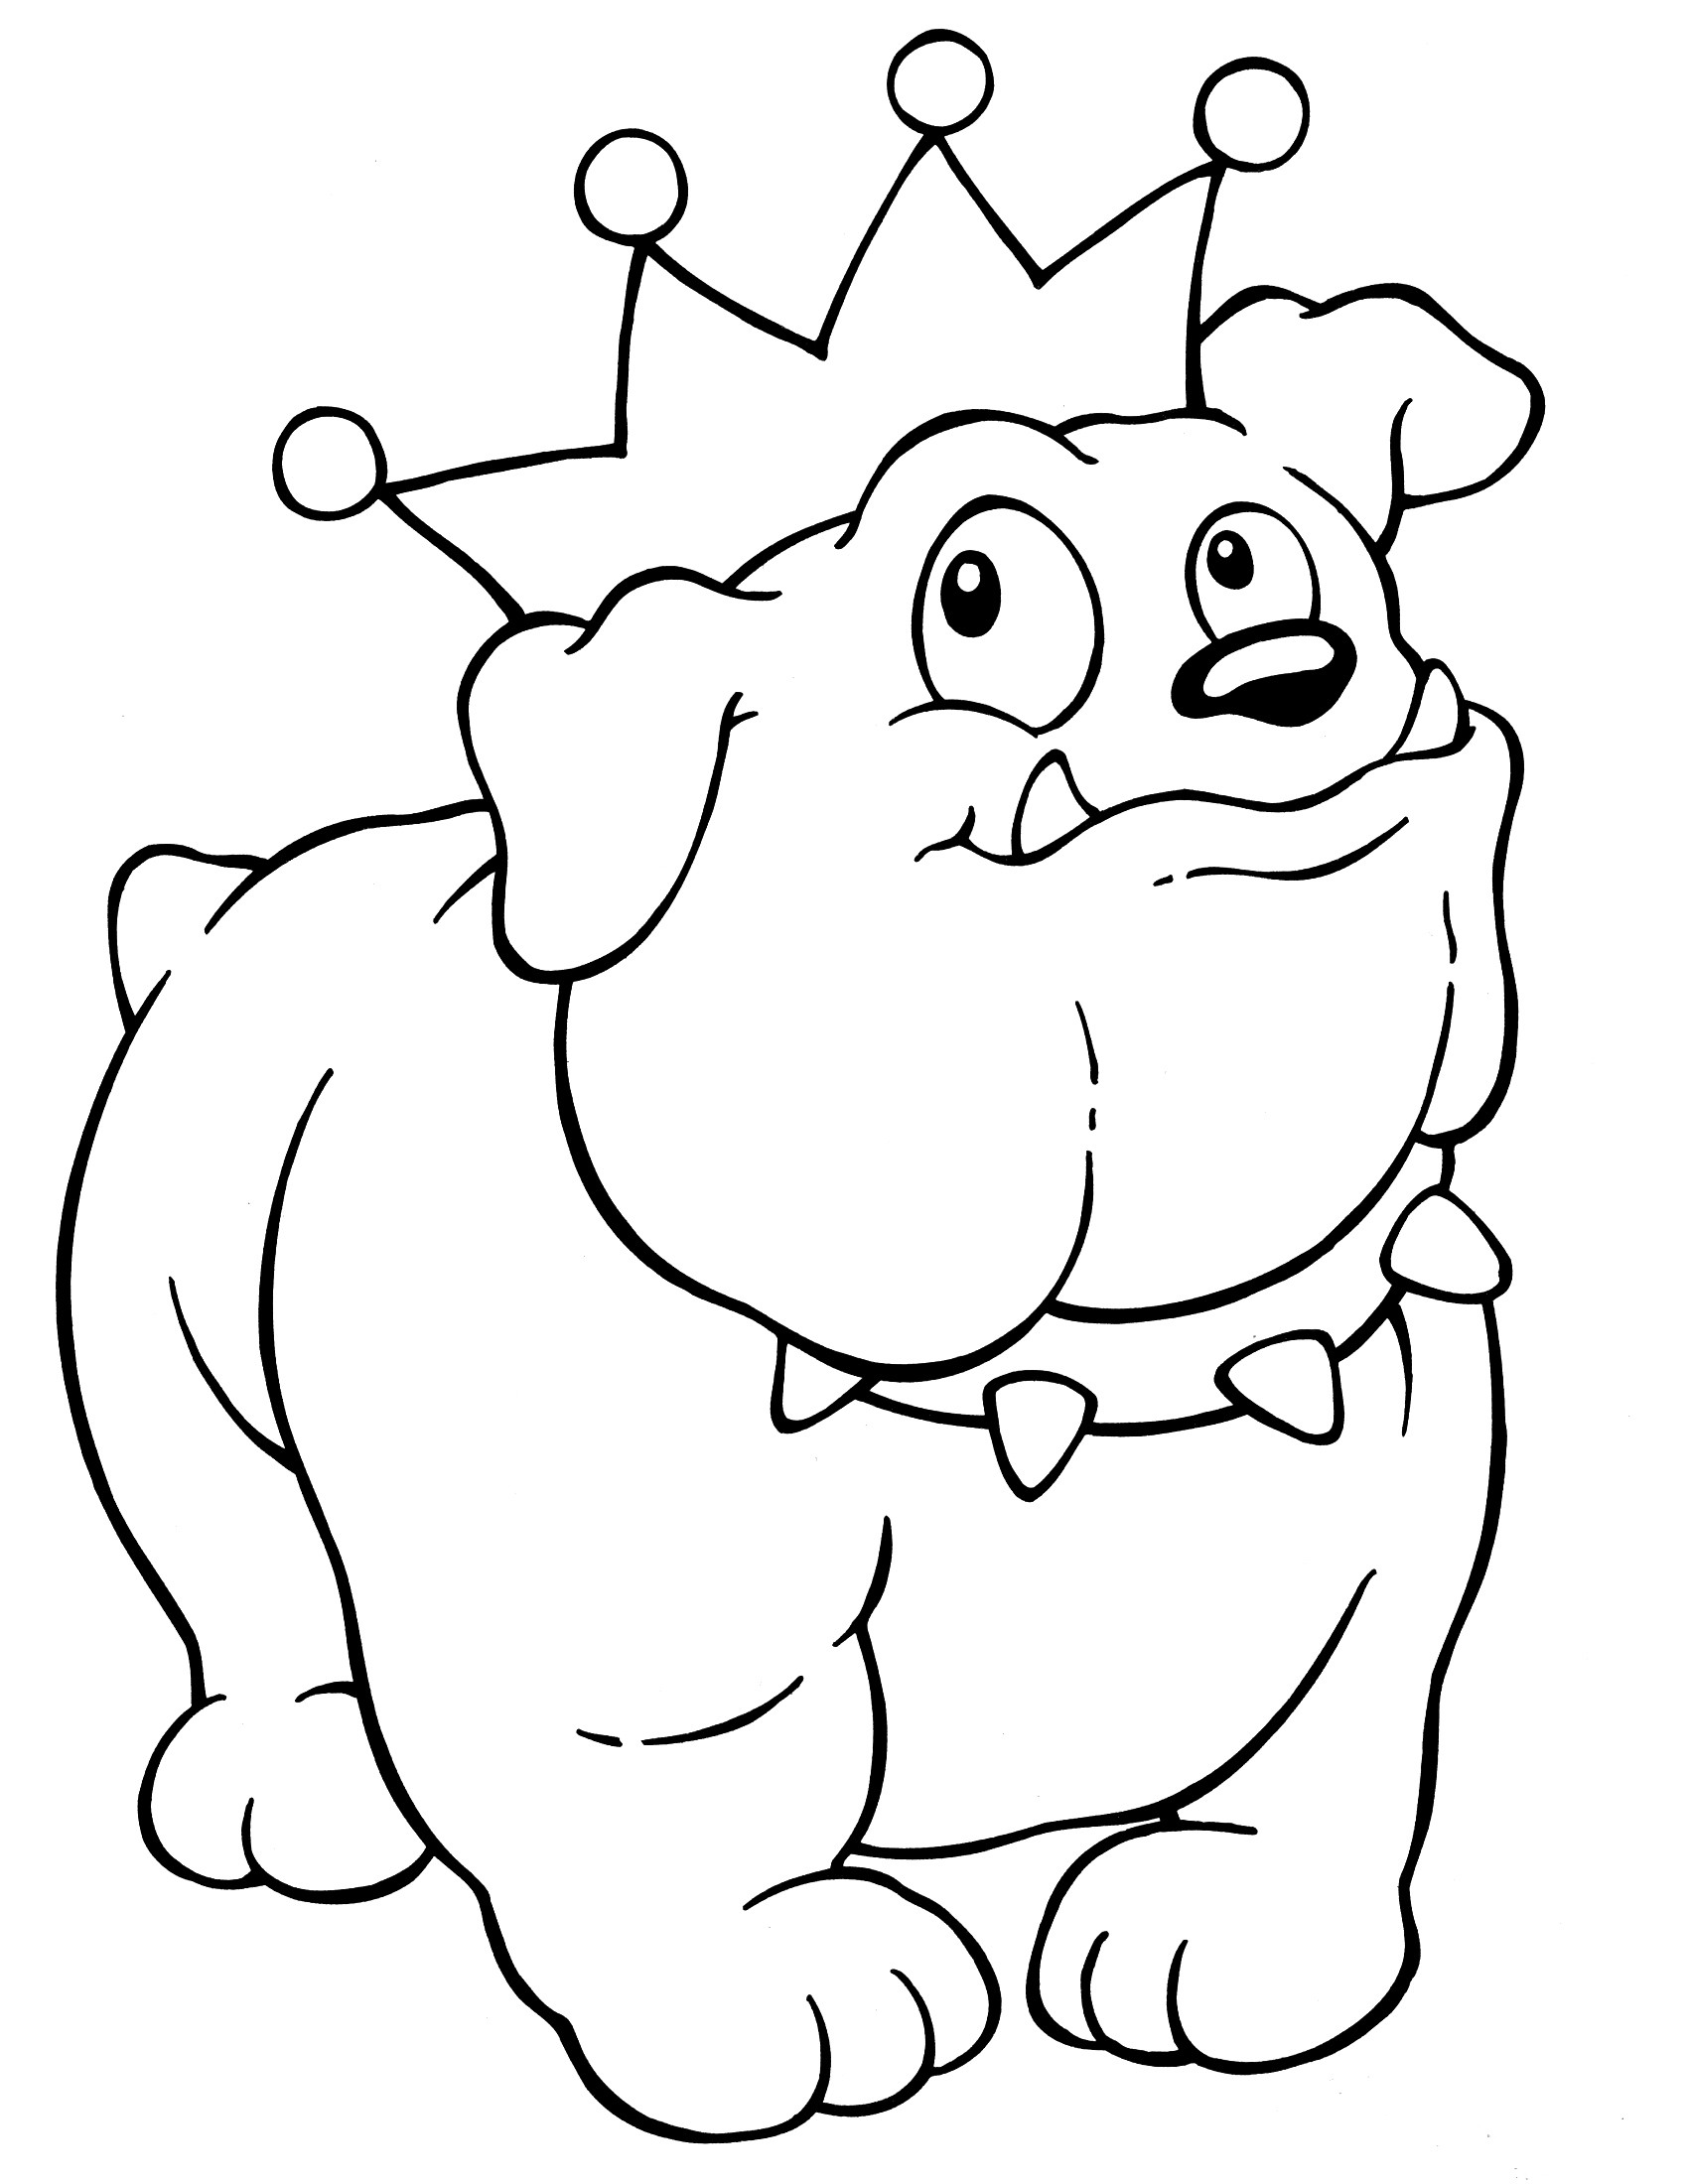 Kids Coloring Pages Com at GetColorings.com | Free printable colorings